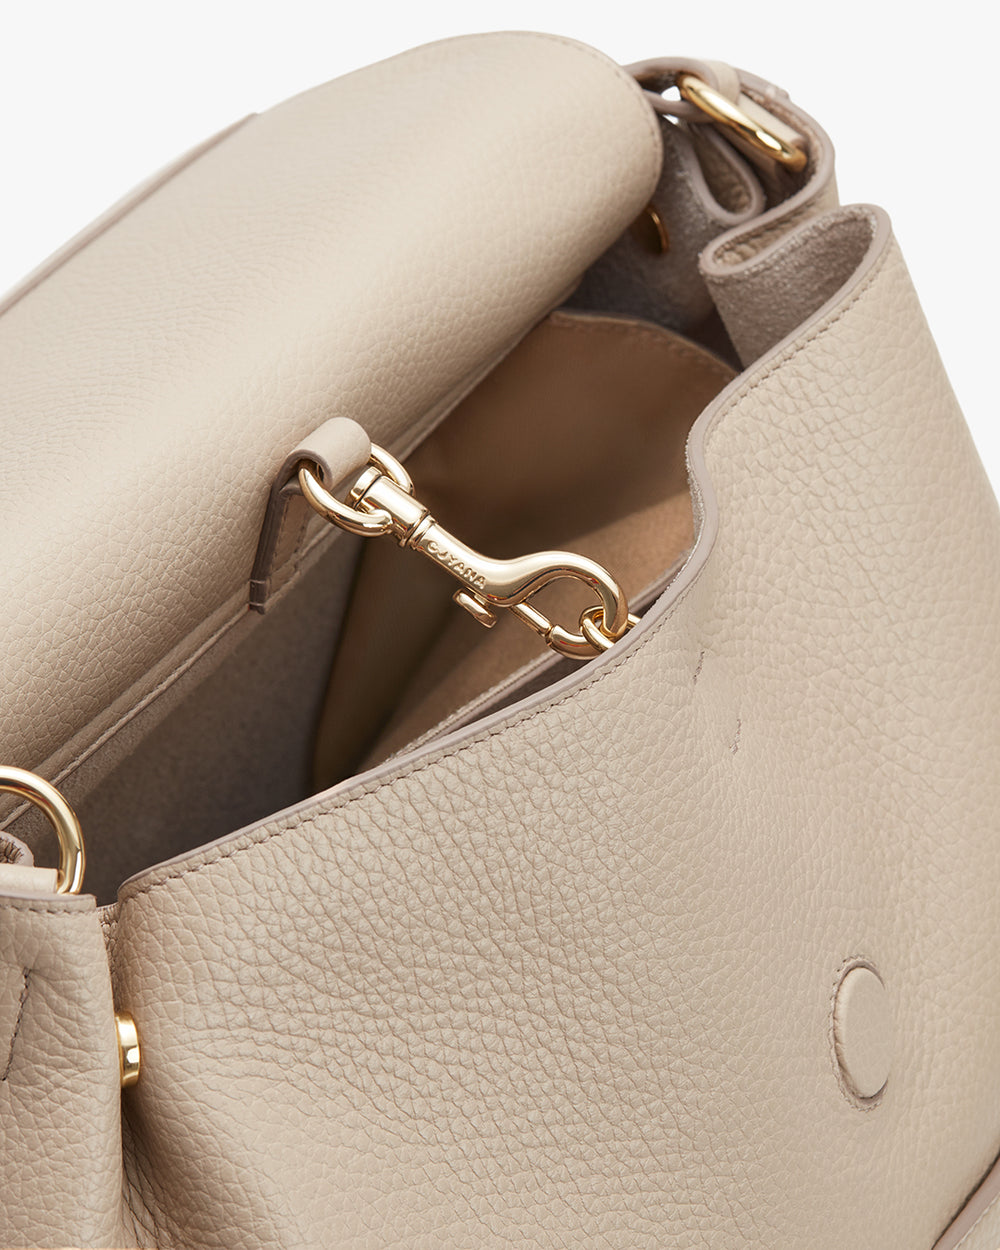 Open handbag with a clasp visible inside.